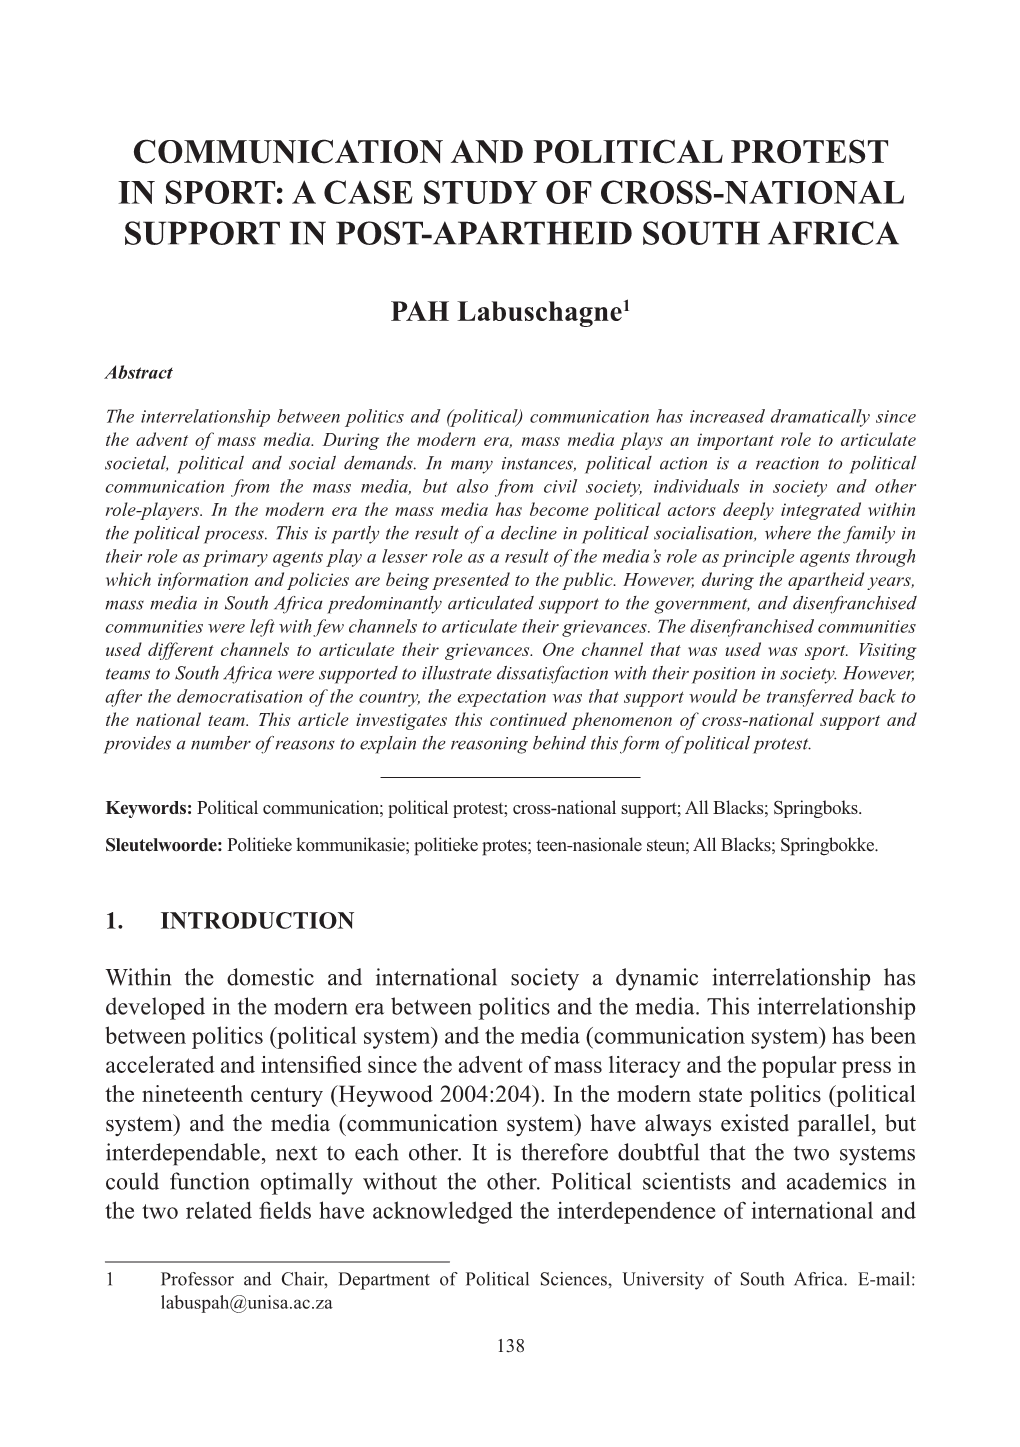 Communication and Political Protest in Sport: a Case Study of Cross-National Support in Post-Apartheid South Africa